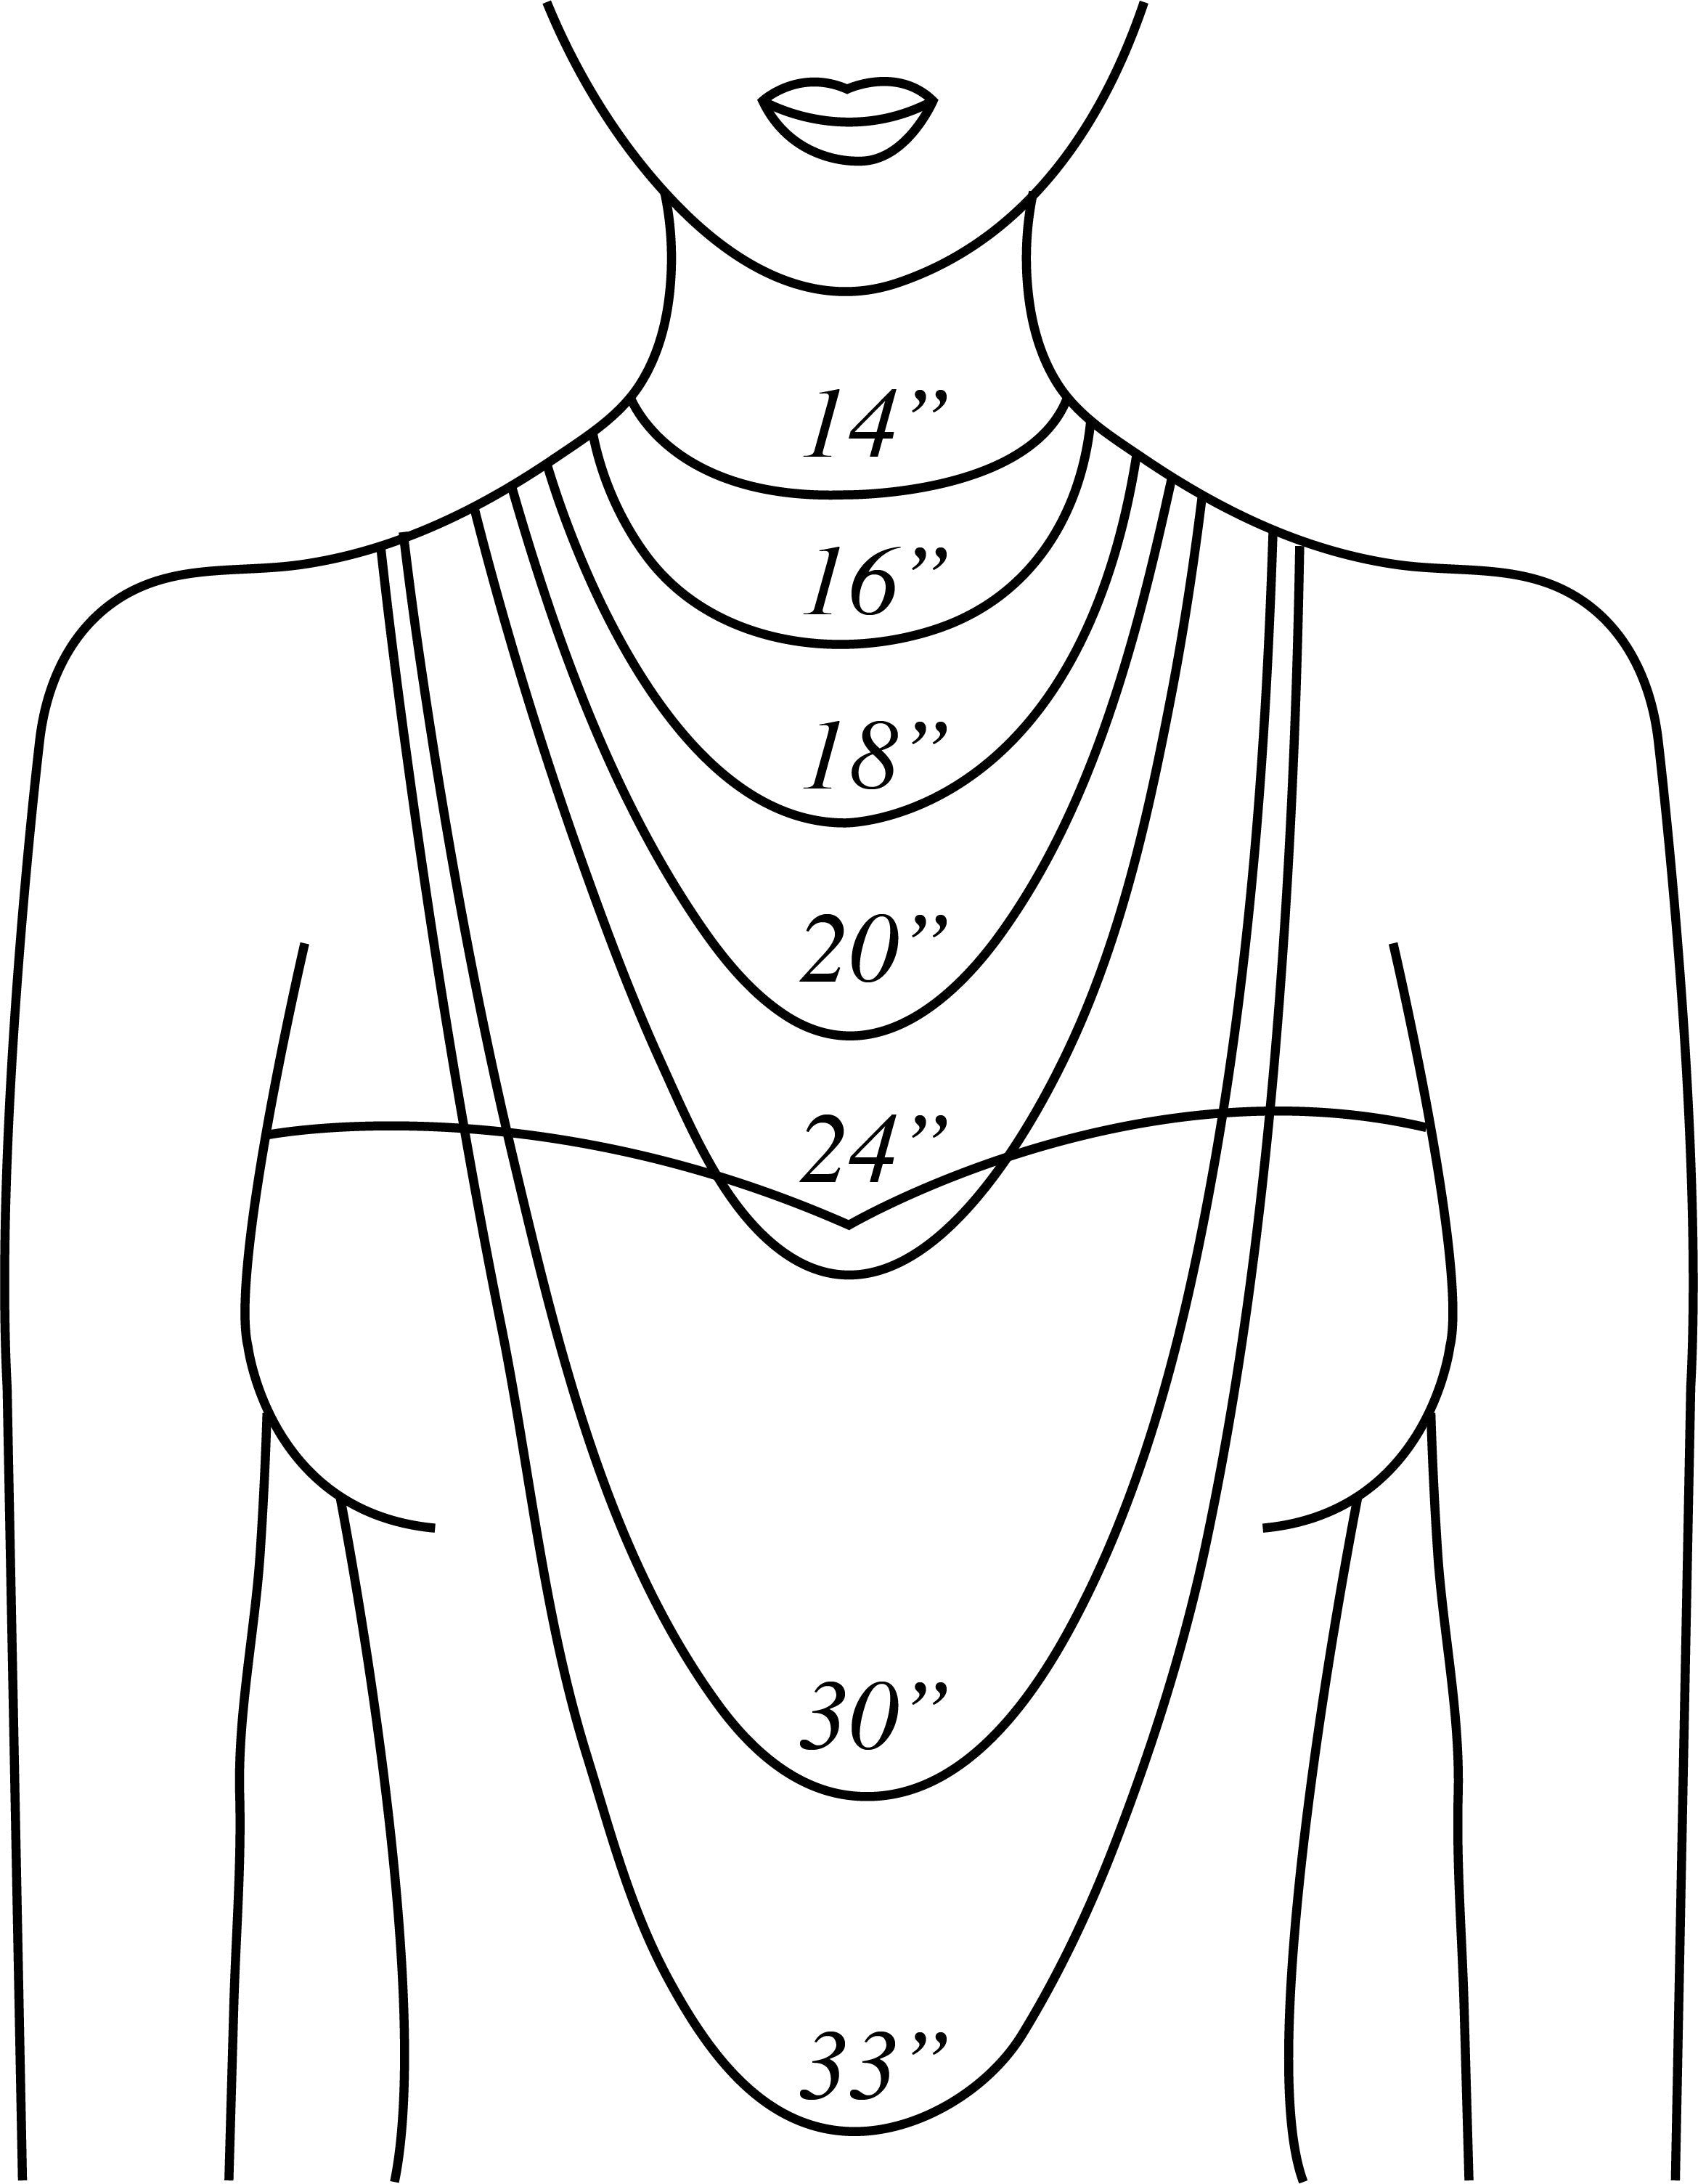 How to Measure Necklace Size | Necklace Size Calculator 2023